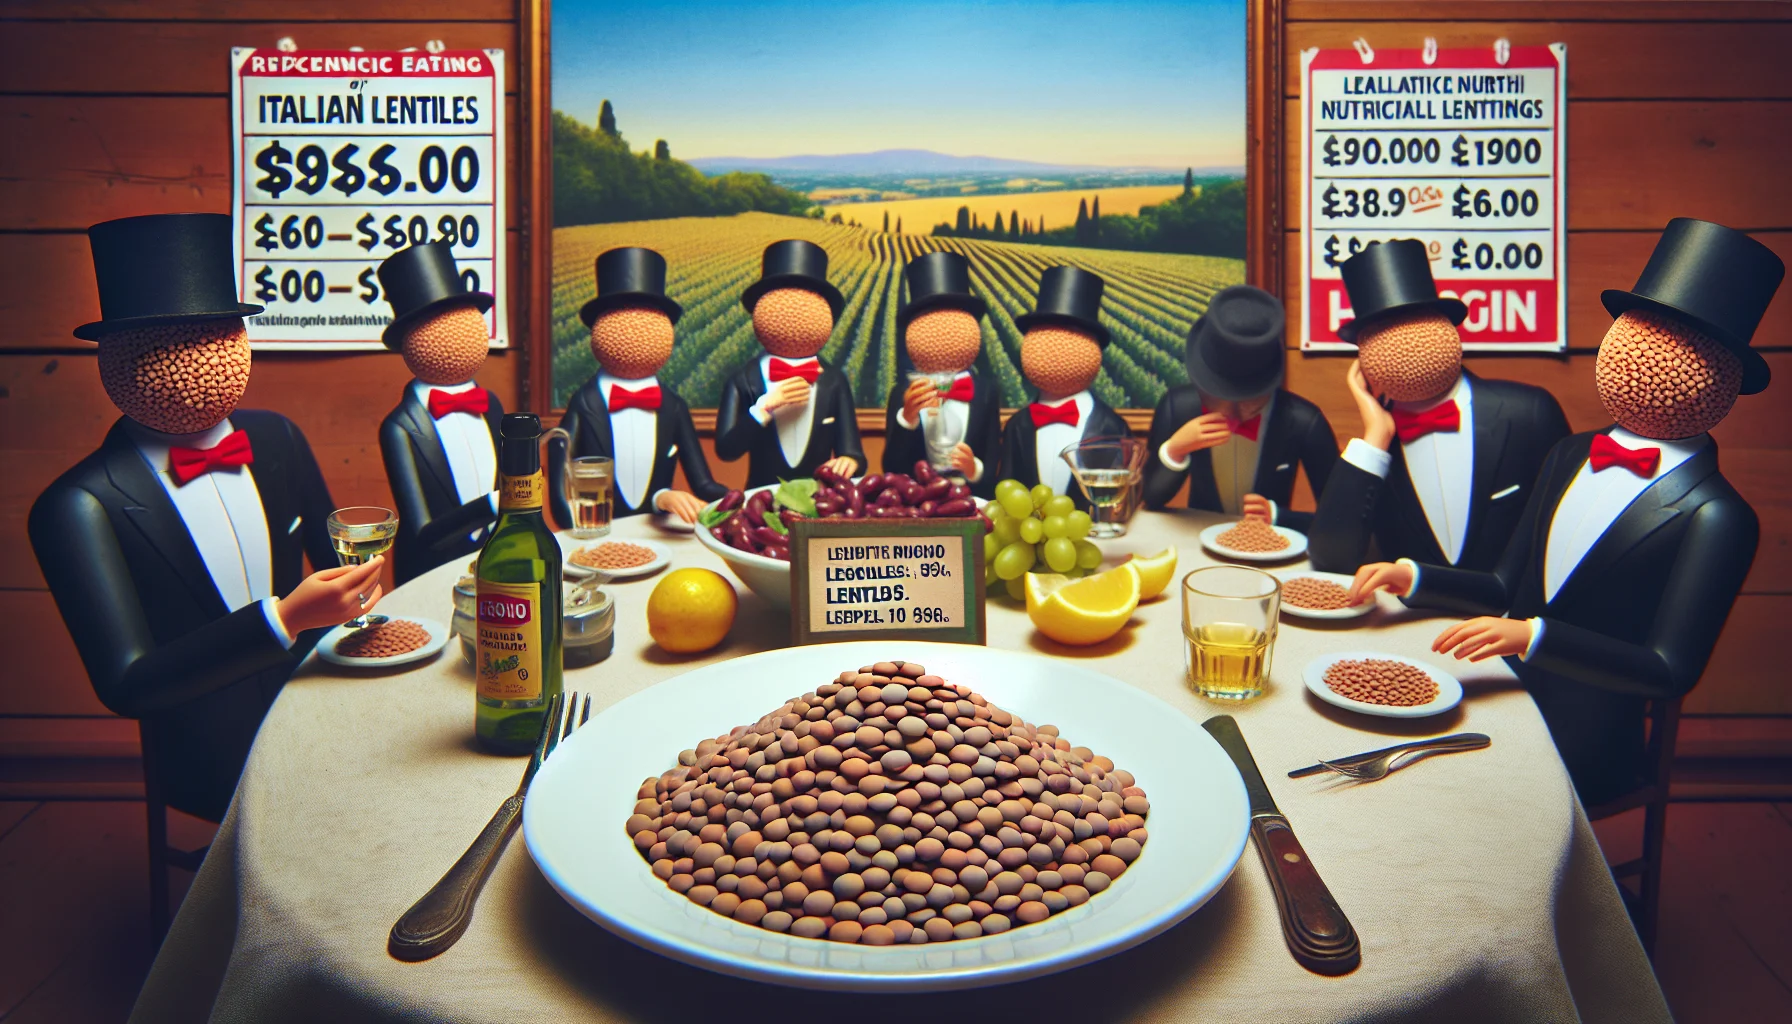 Visualize a humorous, yet tasteful, scene promoting healthy and cost-effective eating with an emphasis on Italian lentils. Imagine a platter of delicious, nutritious Italian lentils wearing tiny top hats and bow ties, engaging in conversation at a fancy cocktail party. The surrounding scene includes cost indicators (like price tags and discount stickers) humorously suggesting affordability. The backdrop details an idyllic Italian countryside, emphasizing the origin of the lentils. This whimsical scene showcases the lentils as economical yet delightful dining options.